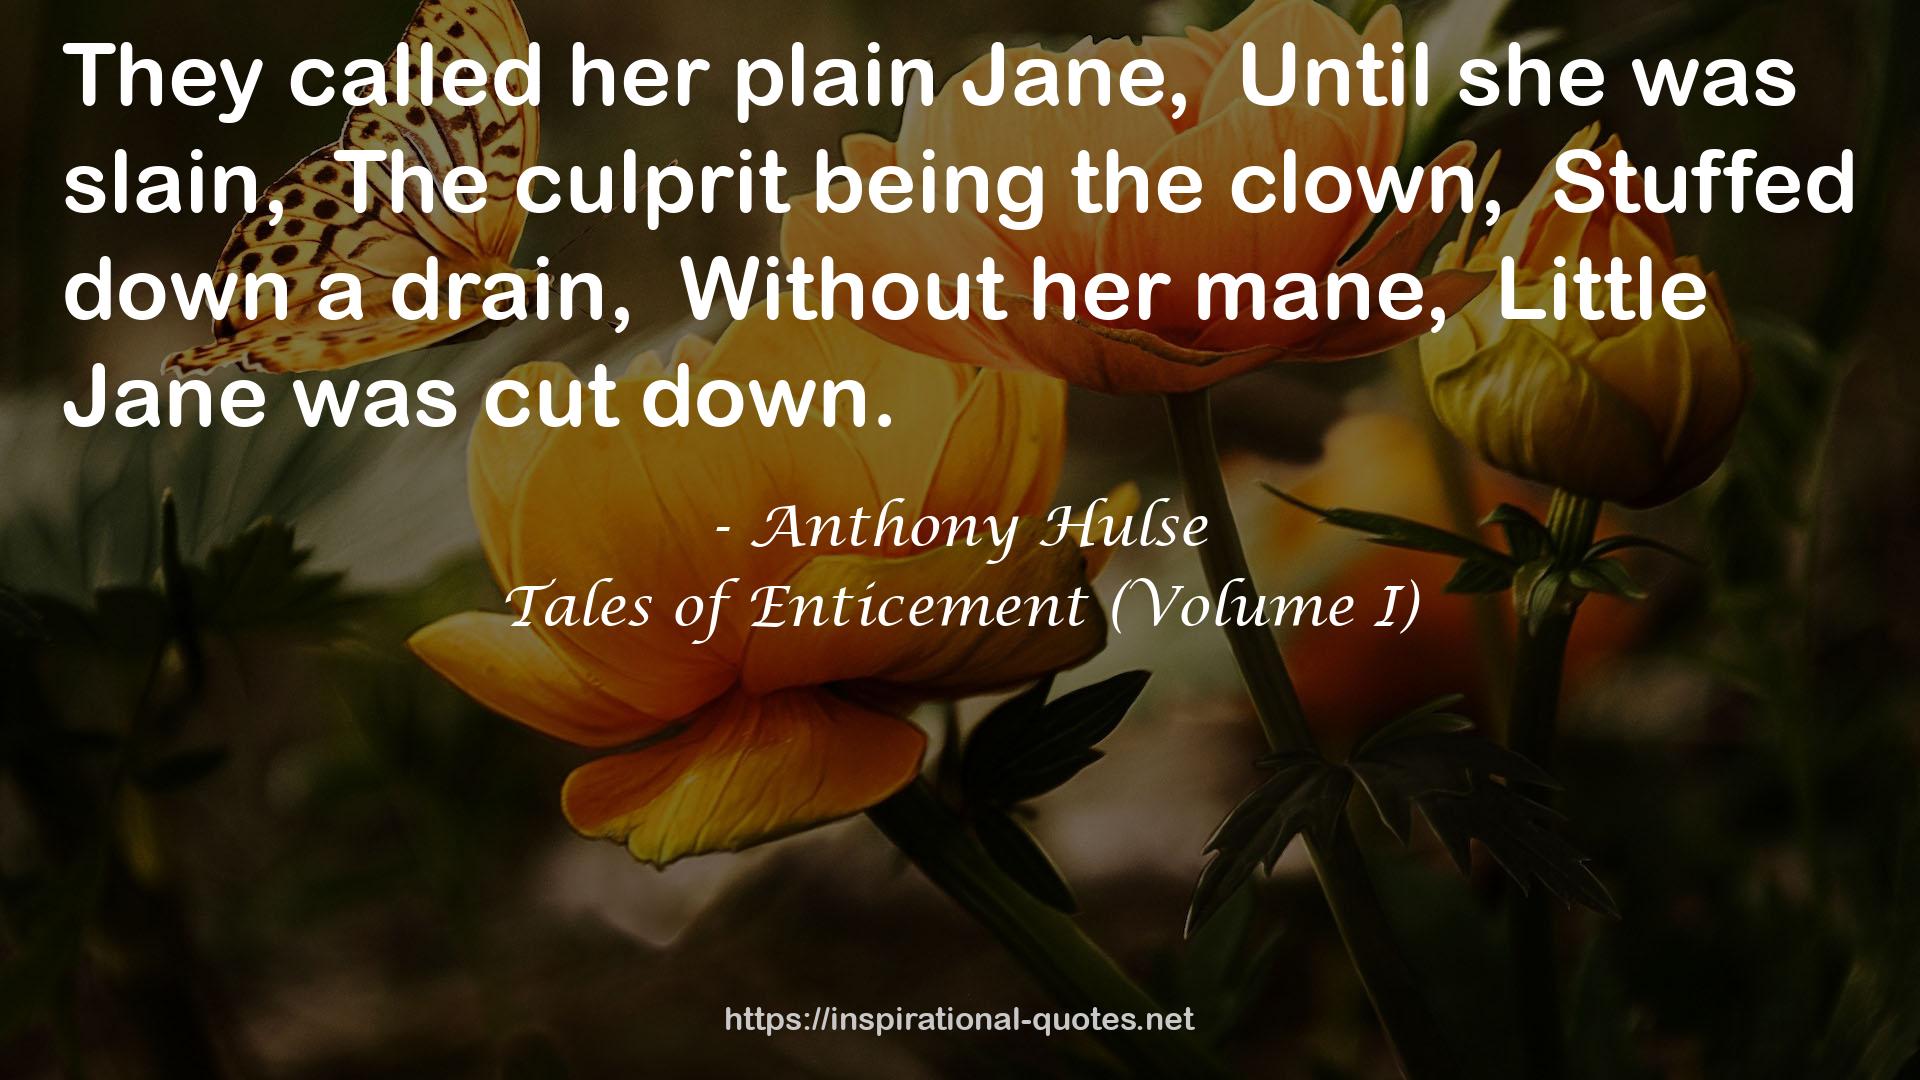 Tales of Enticement (Volume I) QUOTES